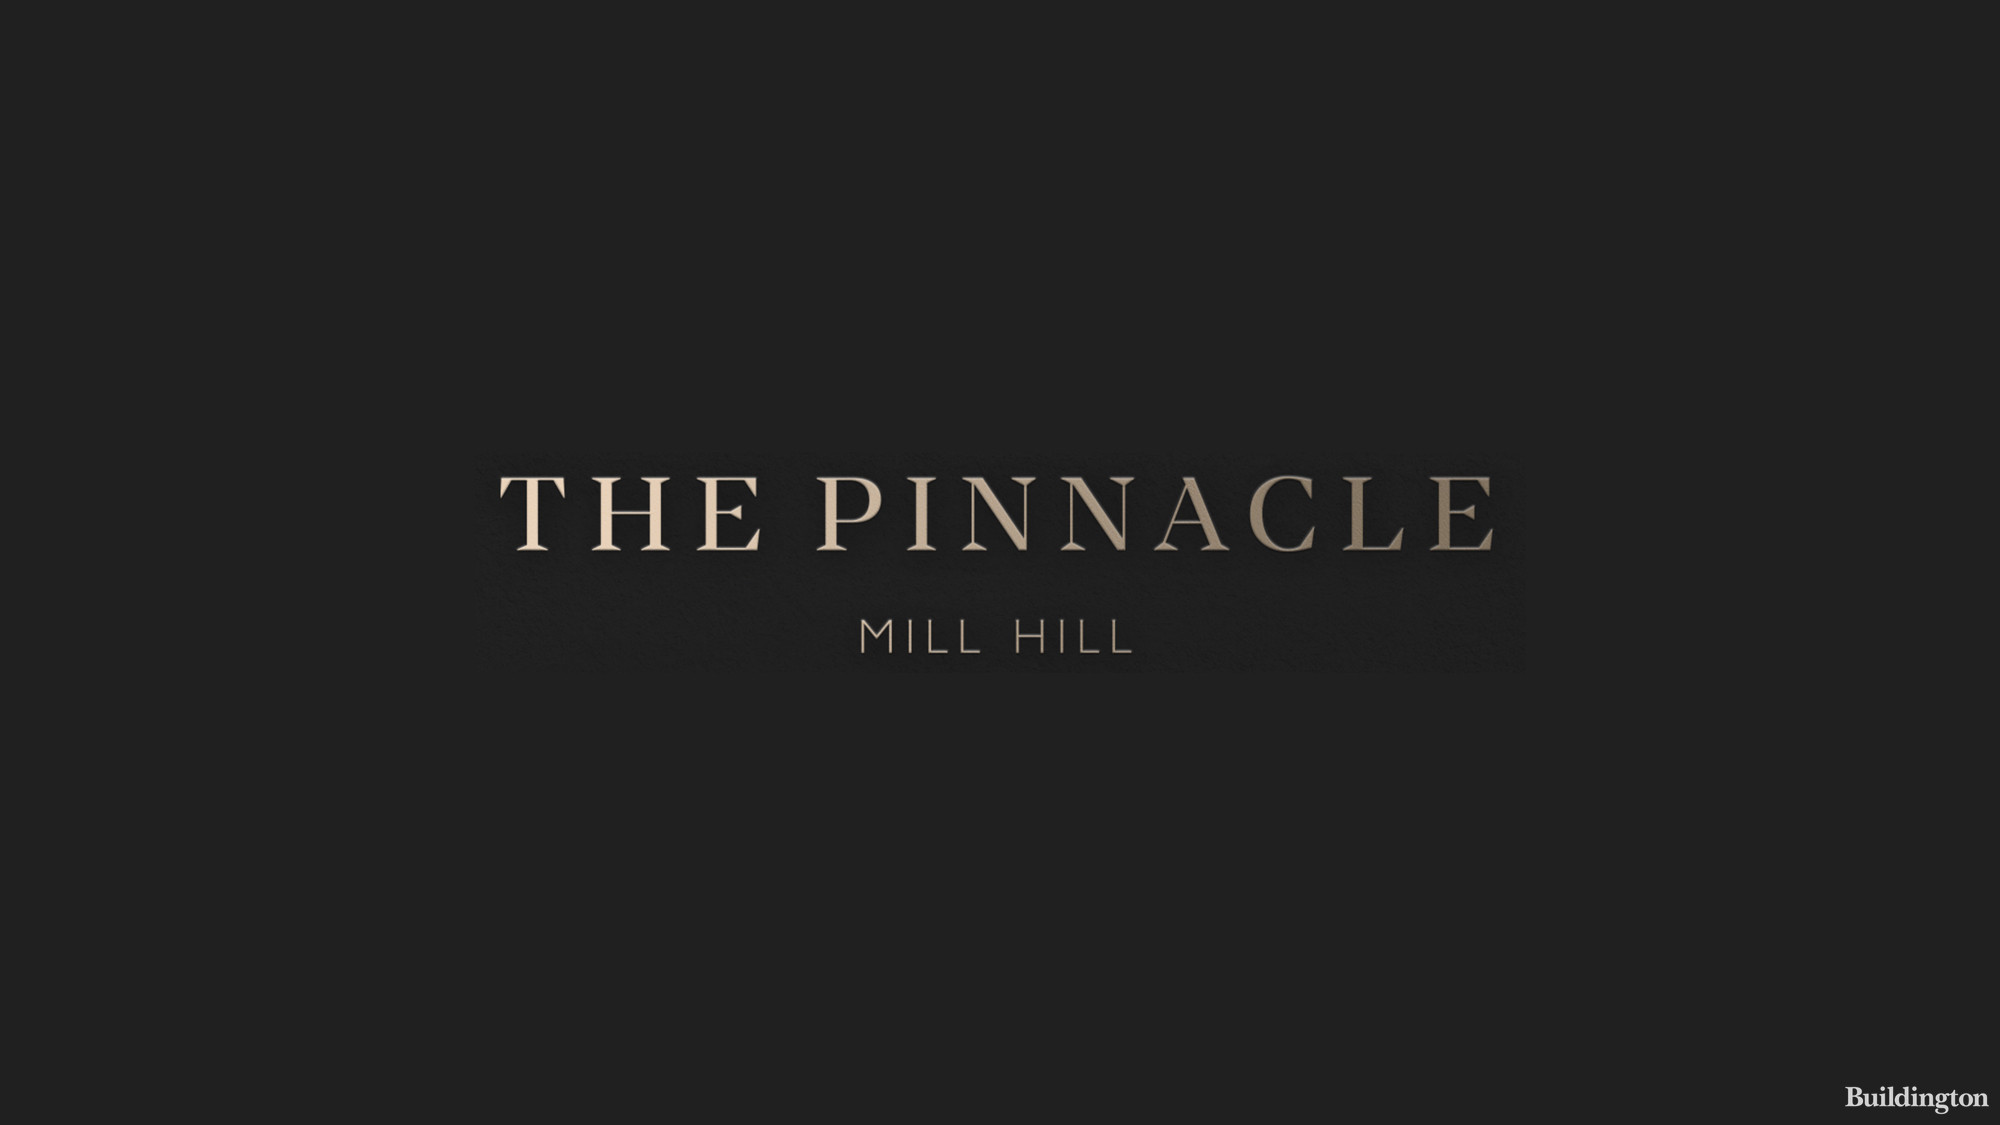 The Pinnacle by Group One in Mill Hill, London NW7